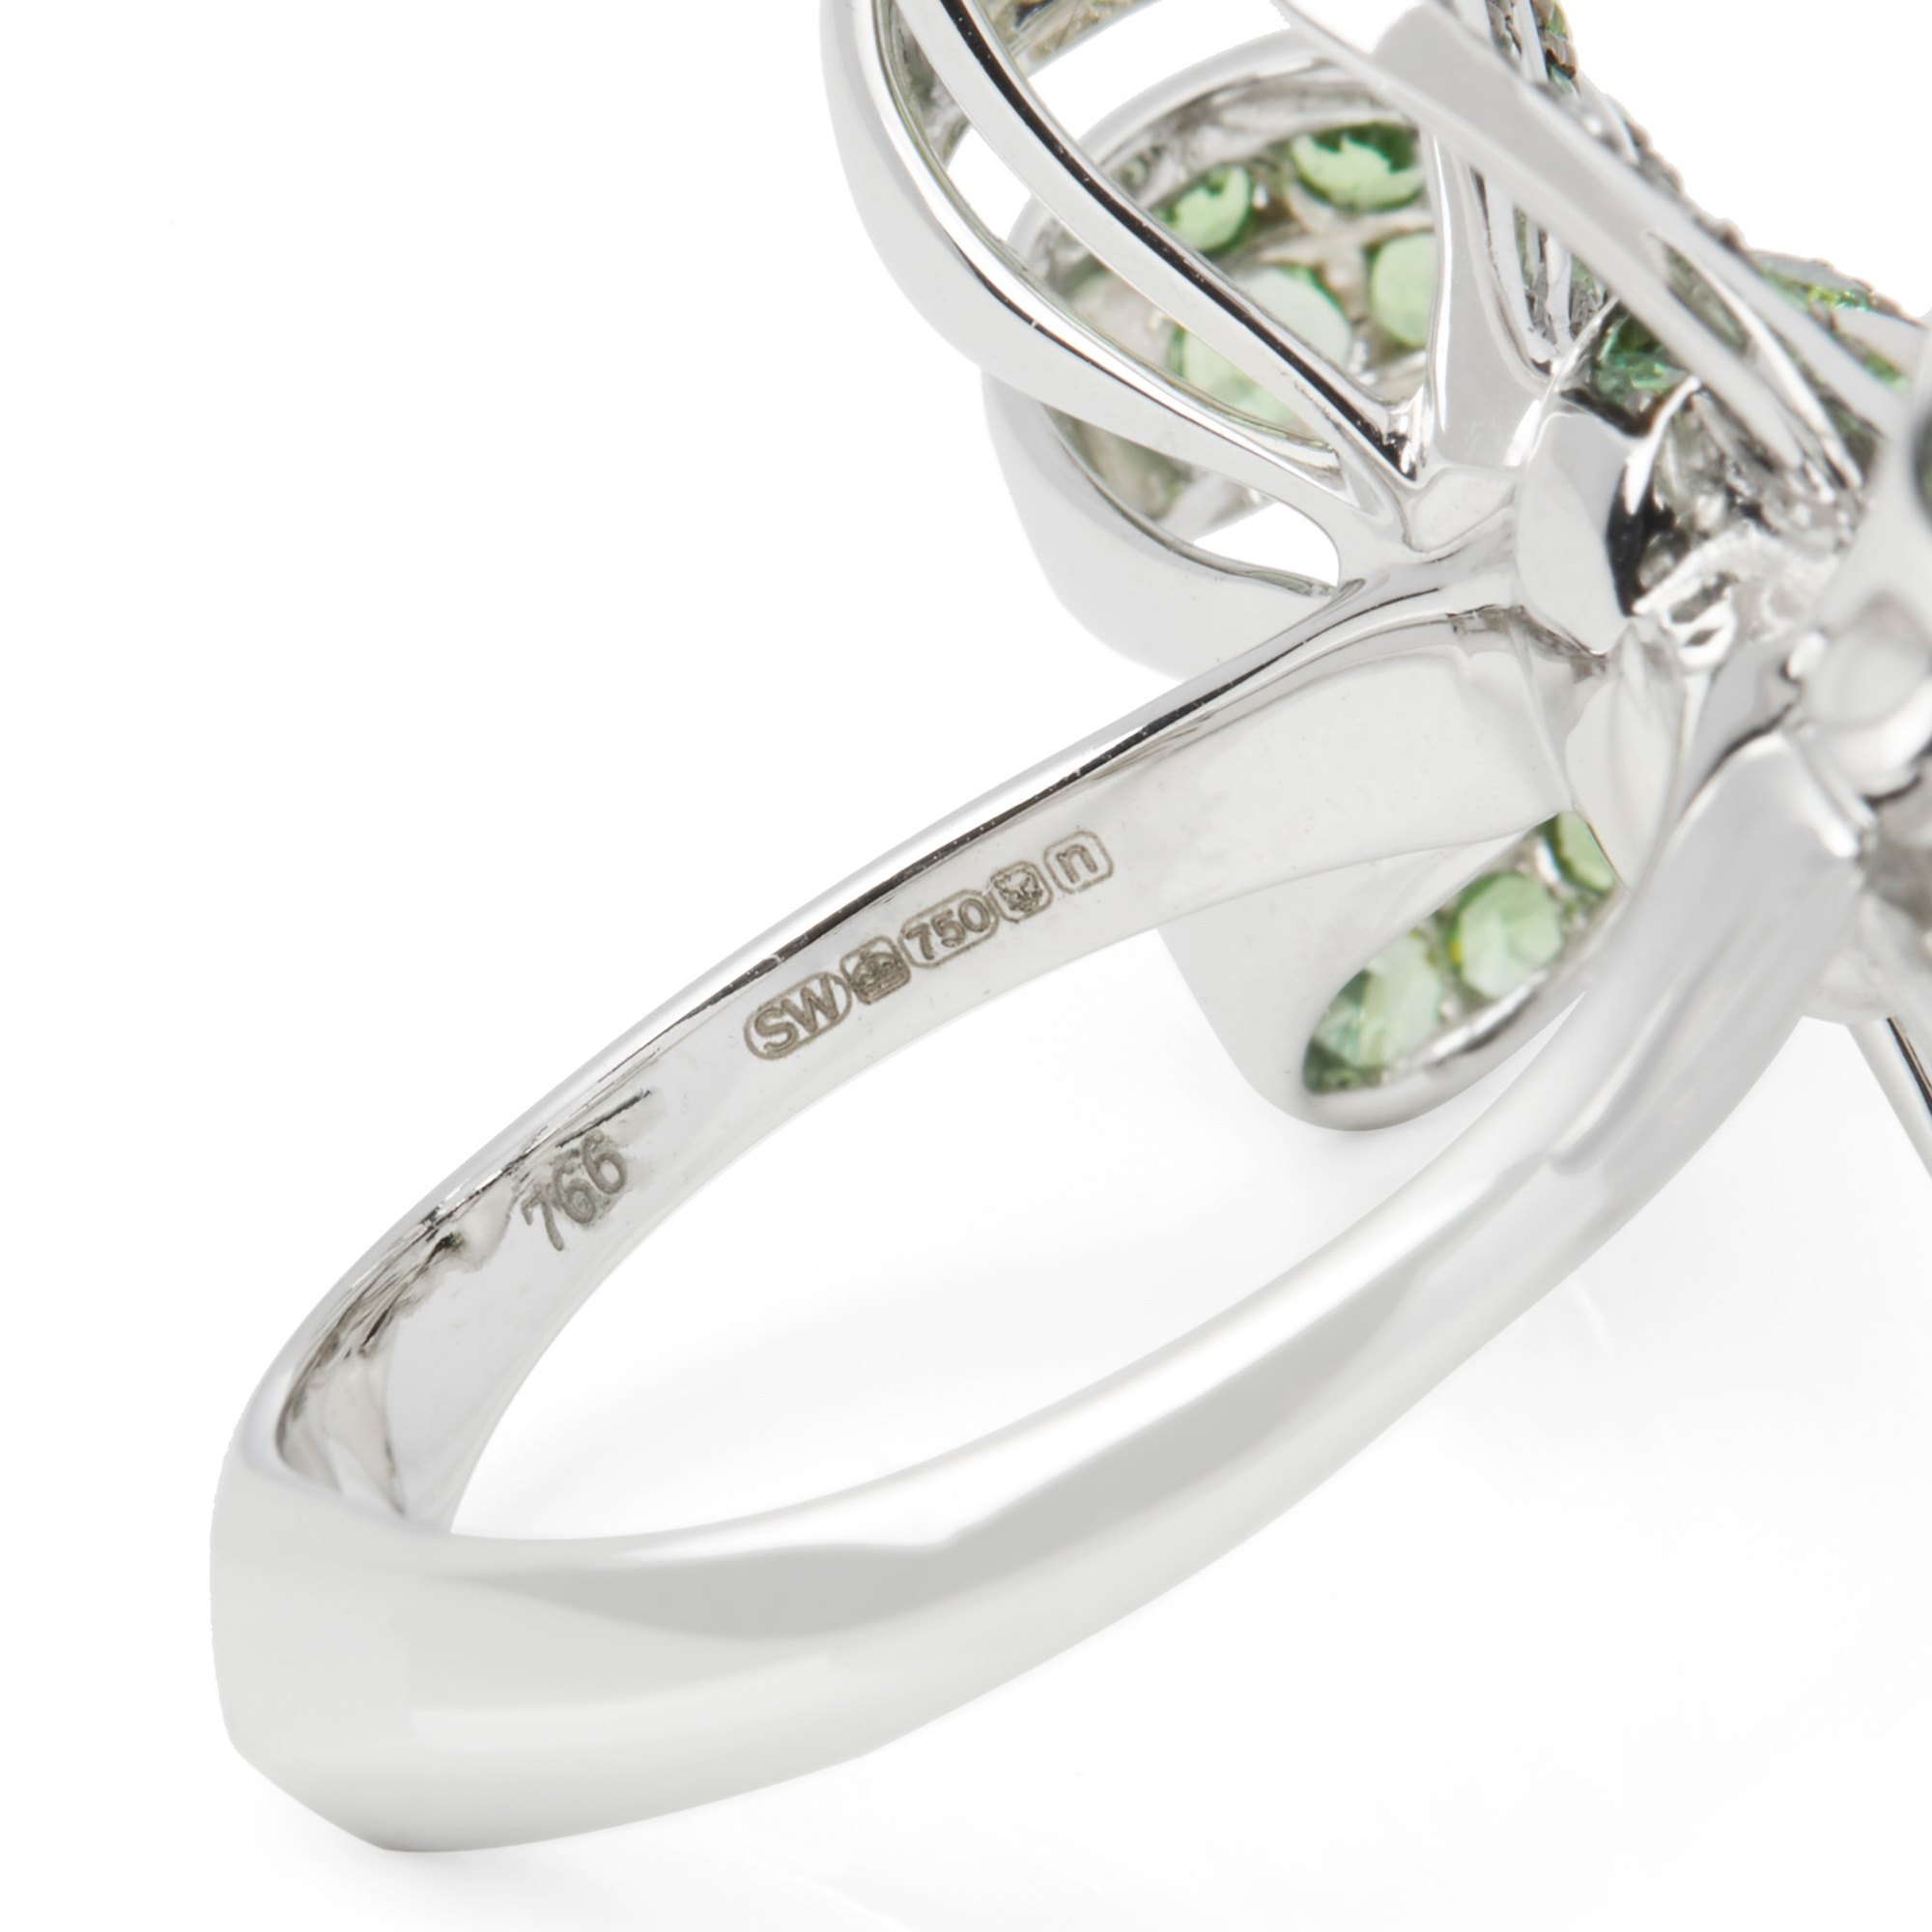 Stephen Webster Forget me Not Pave Tsavorite Bow Ring